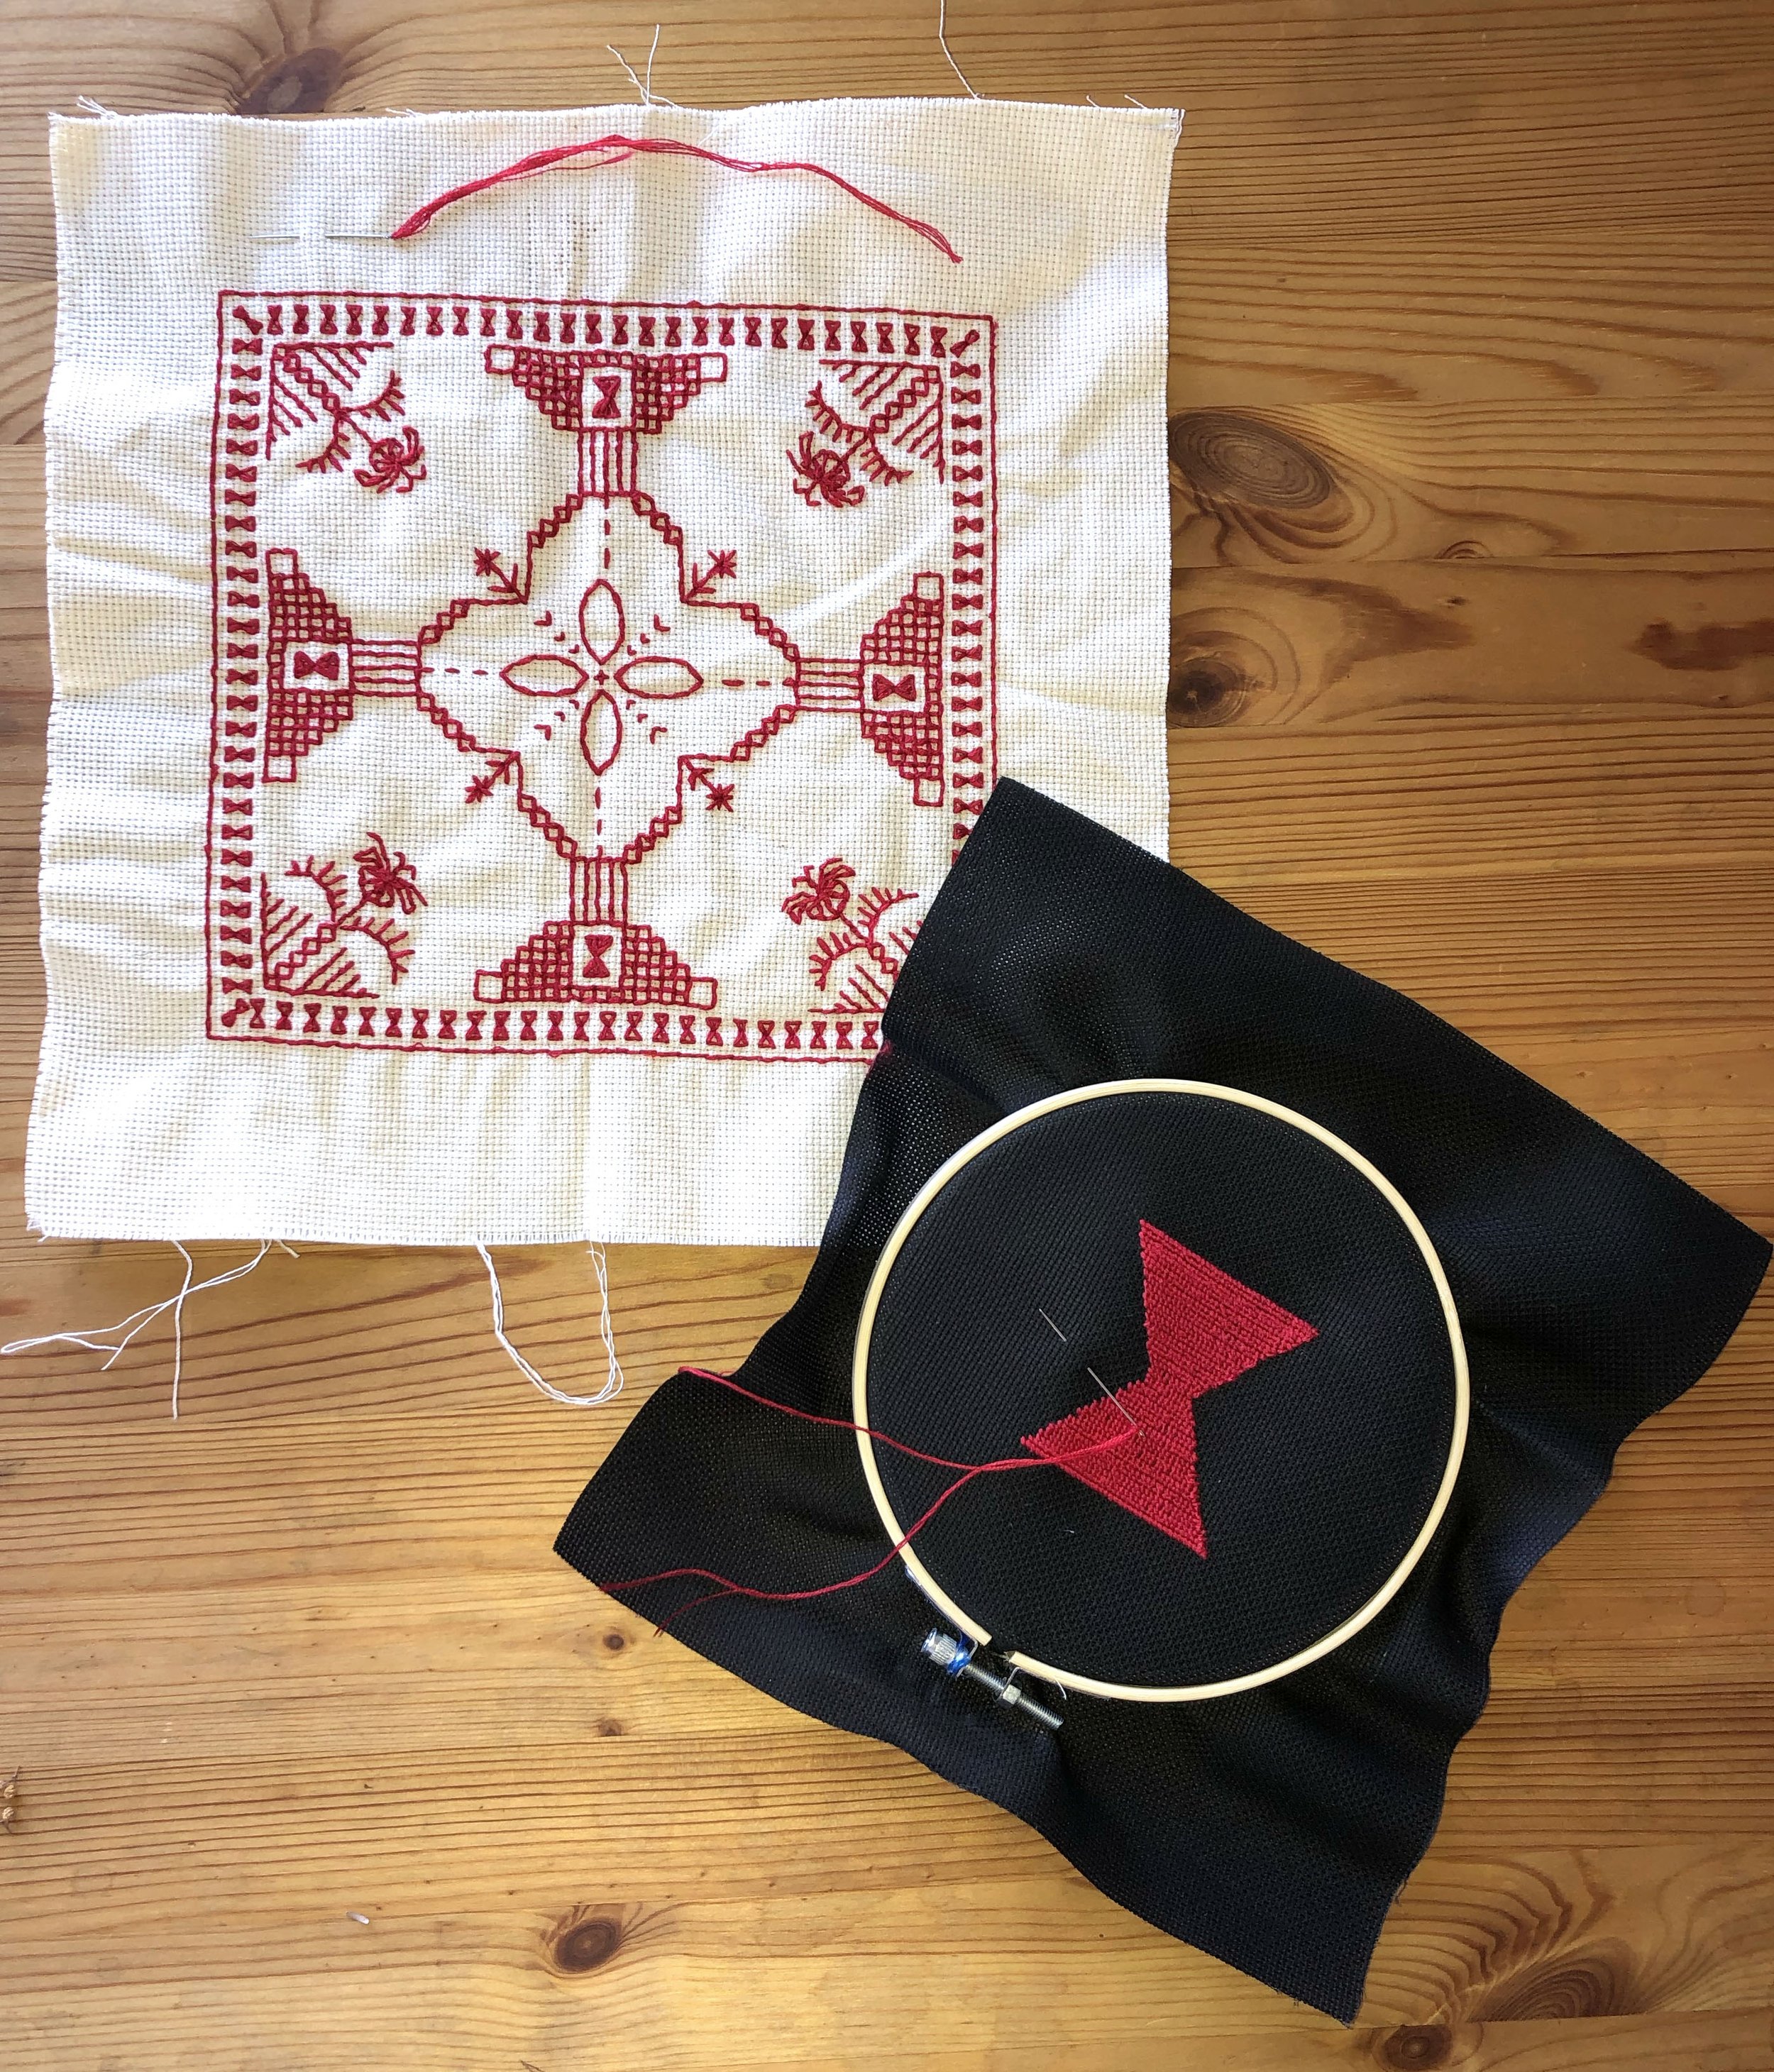 Embroidered Cloth for Intro Credits